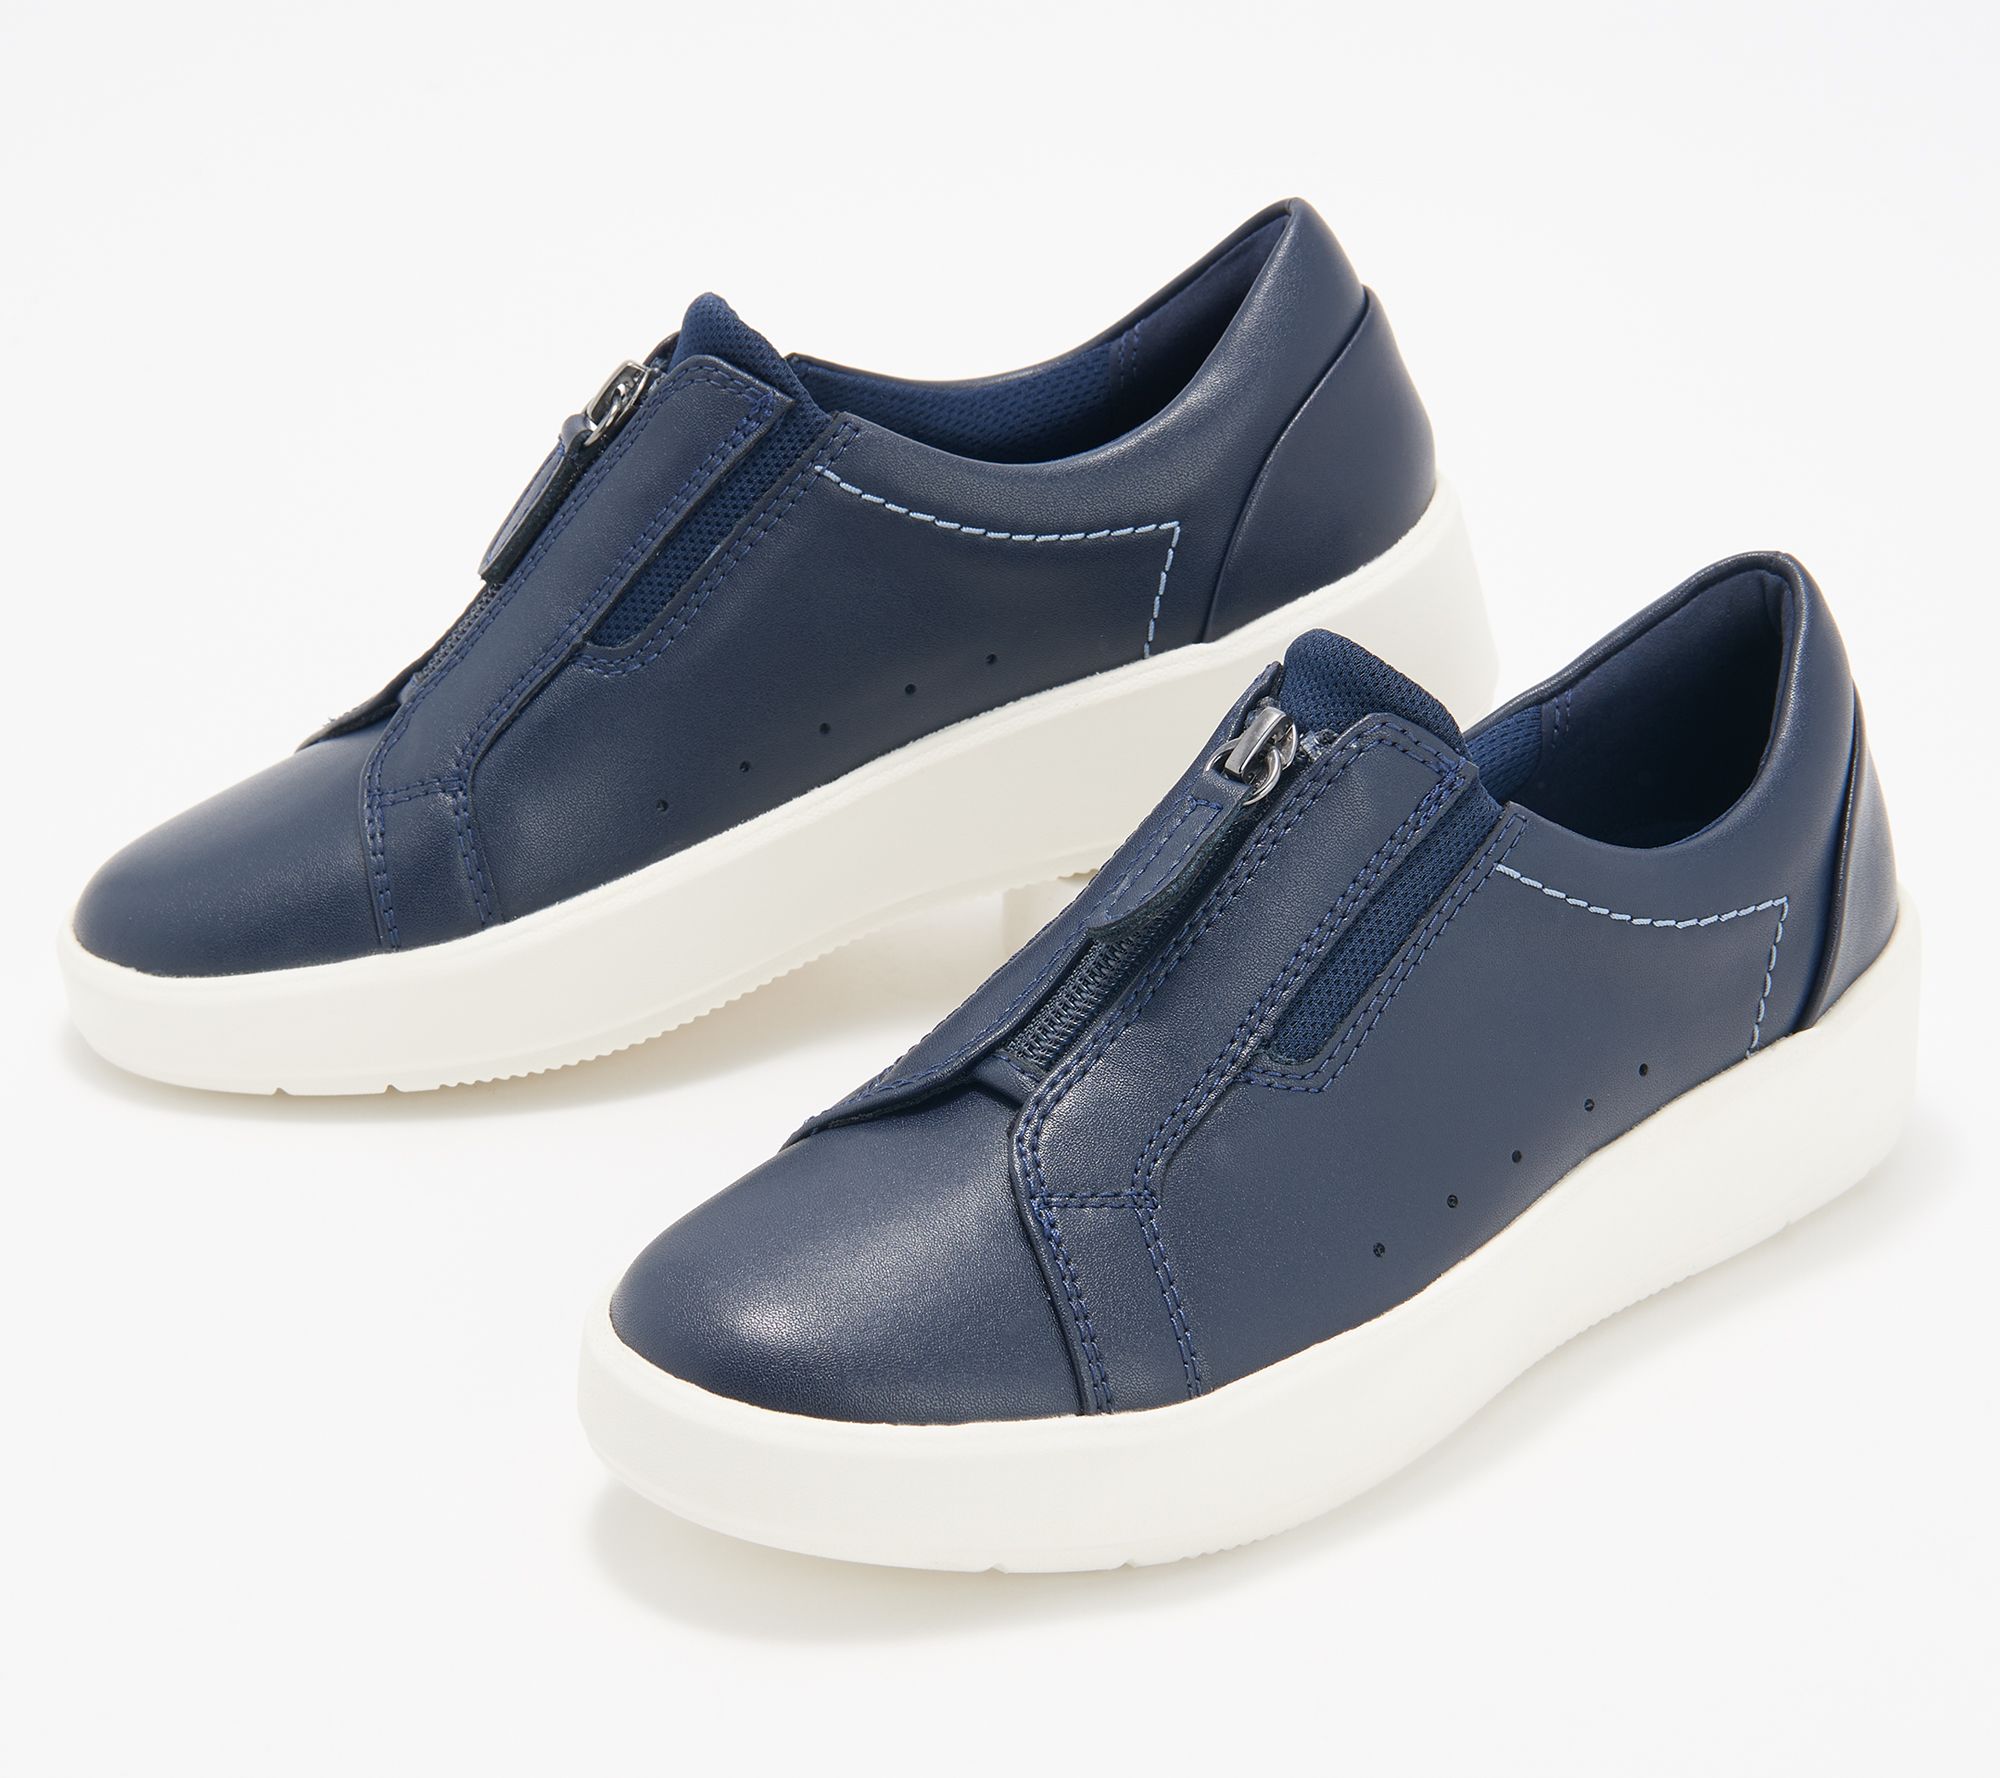 Clarks Collection Leather/Suede Zipper Sneakers - Layton Rae